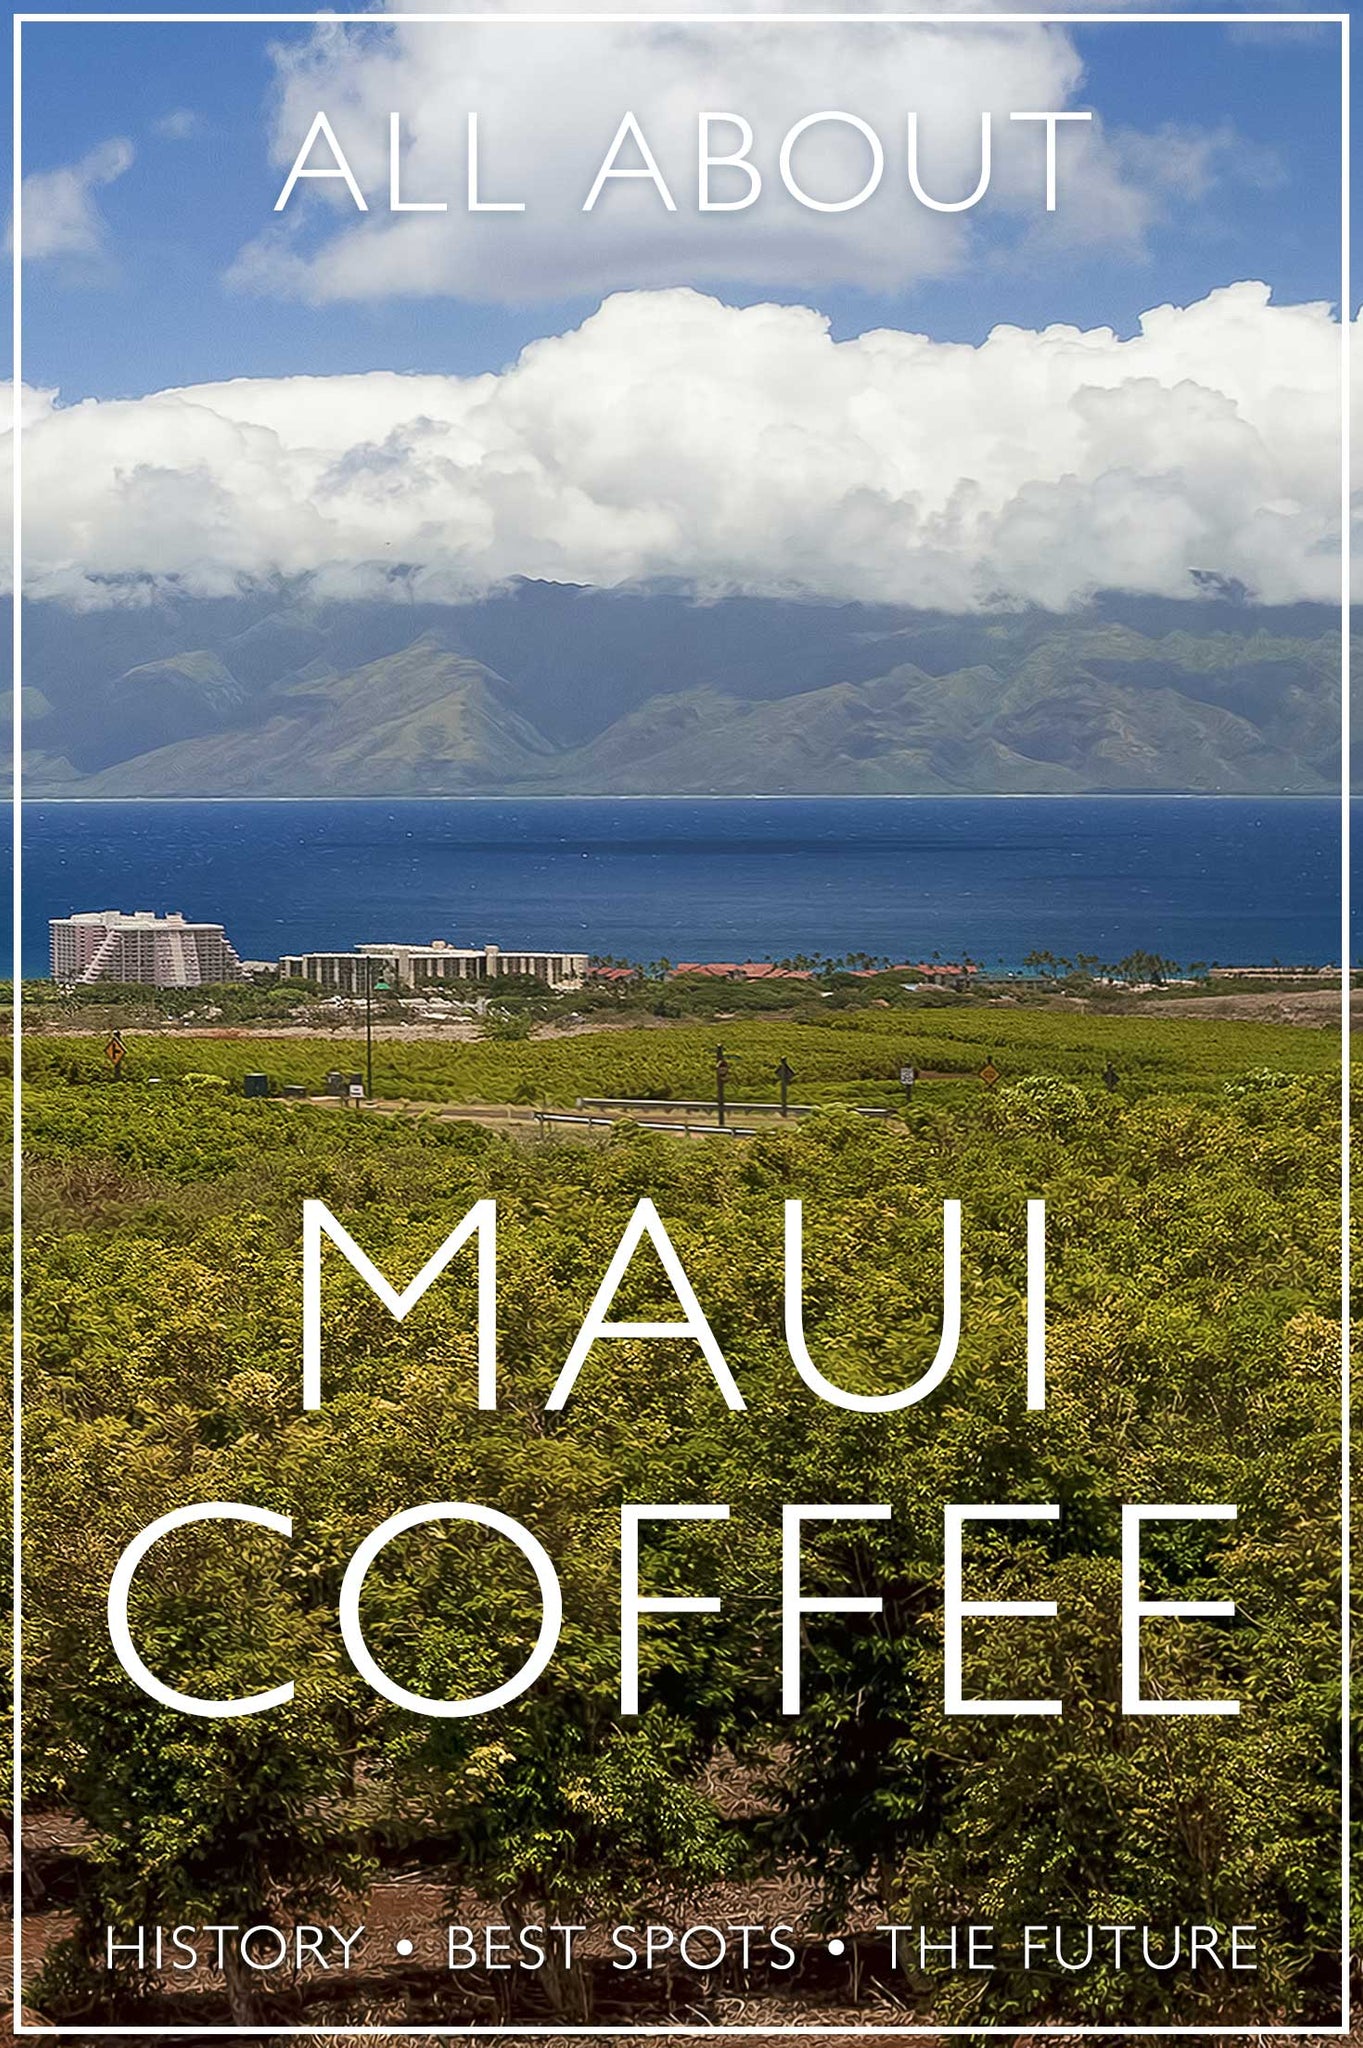 All About Maui Coffee